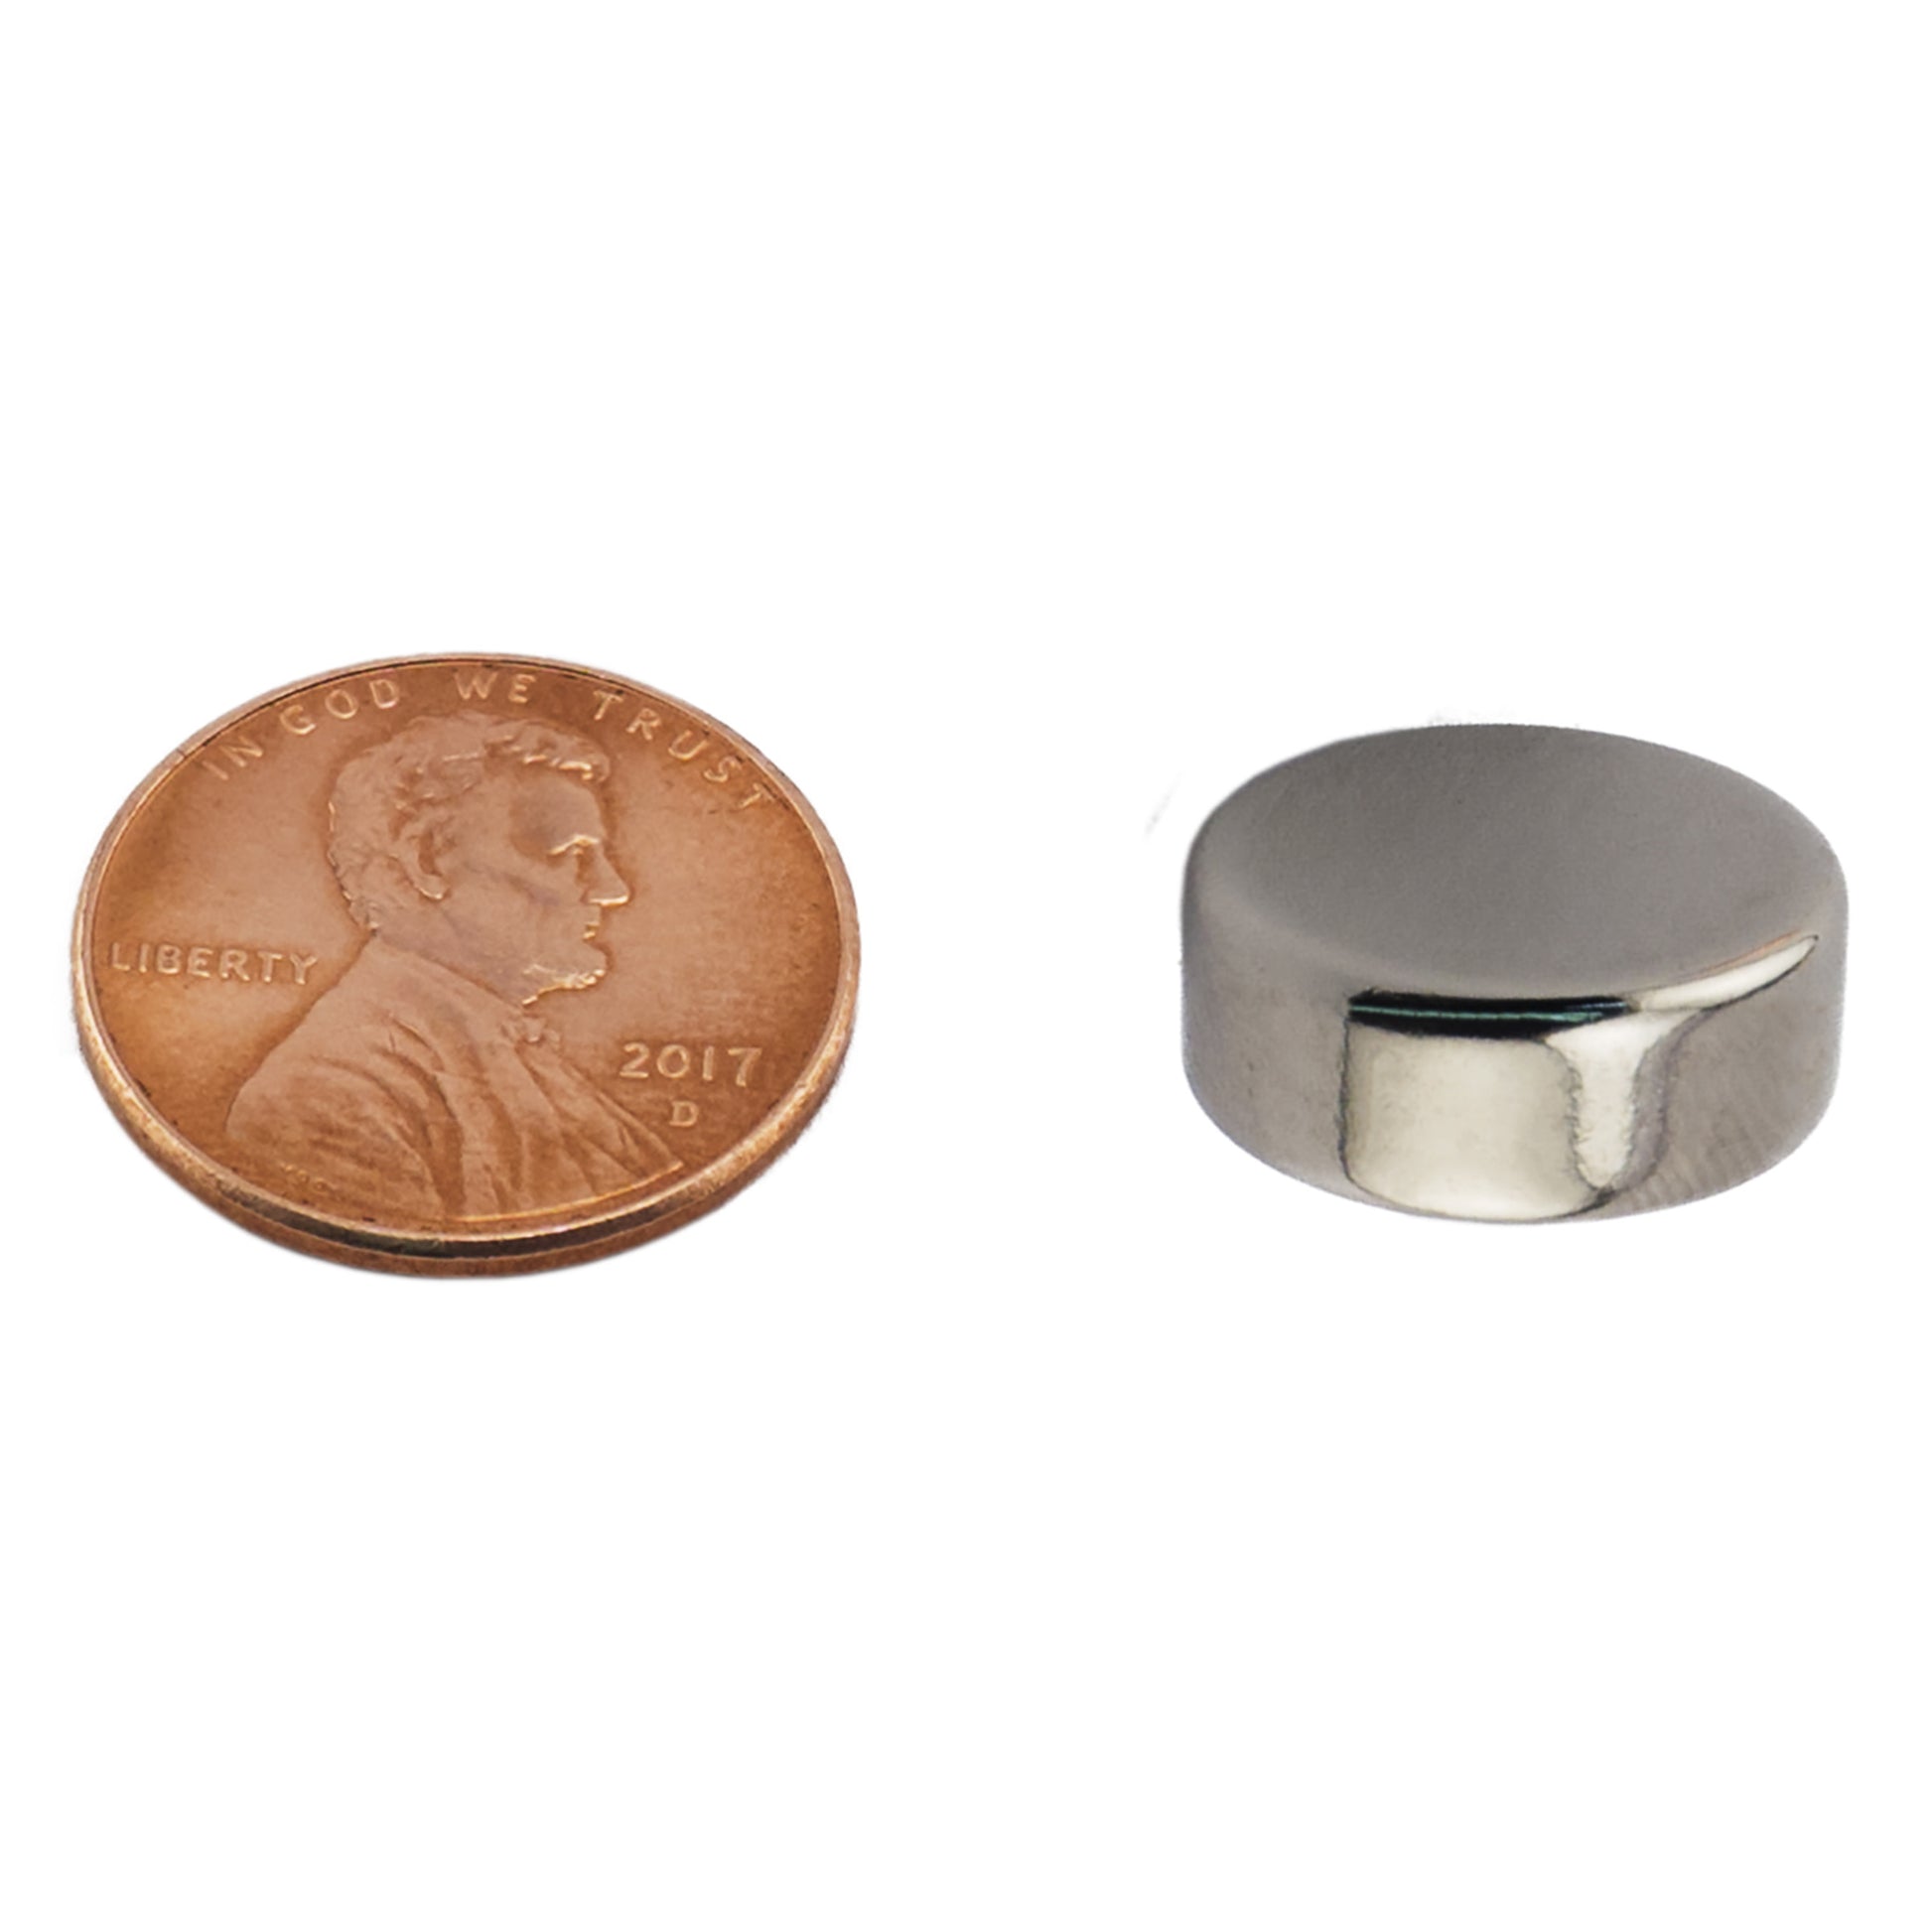 Load image into Gallery viewer, ND006216N Neodymium Disc Magnet - Compared to Penny for Size Reference